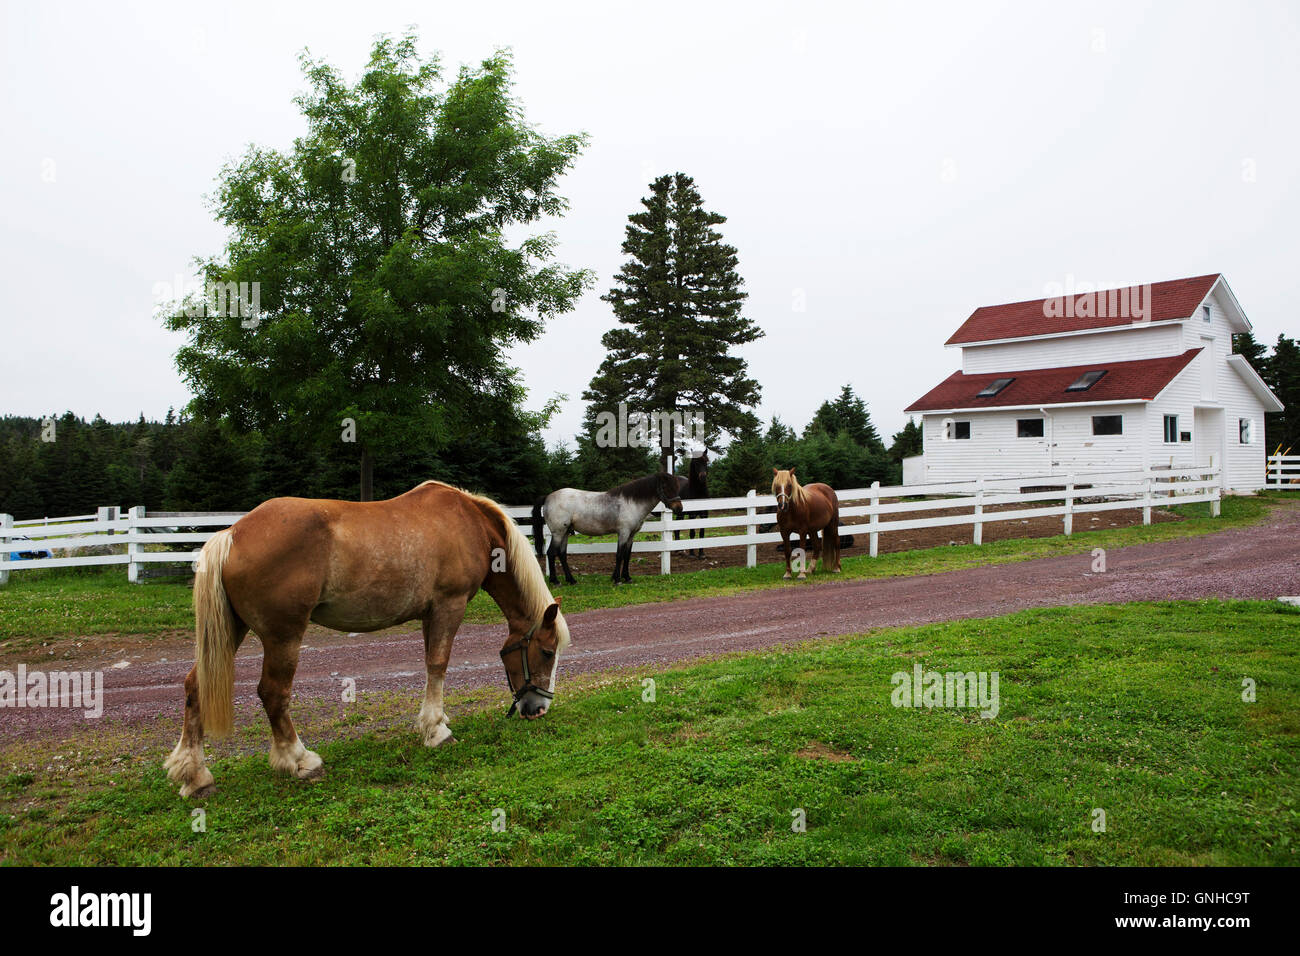 Newfoundland ponies in the grounds of the Doctor's House Inn and Spa at Green's Harbour in Newfoundland and Labrador, Canada. Th Stock Photo